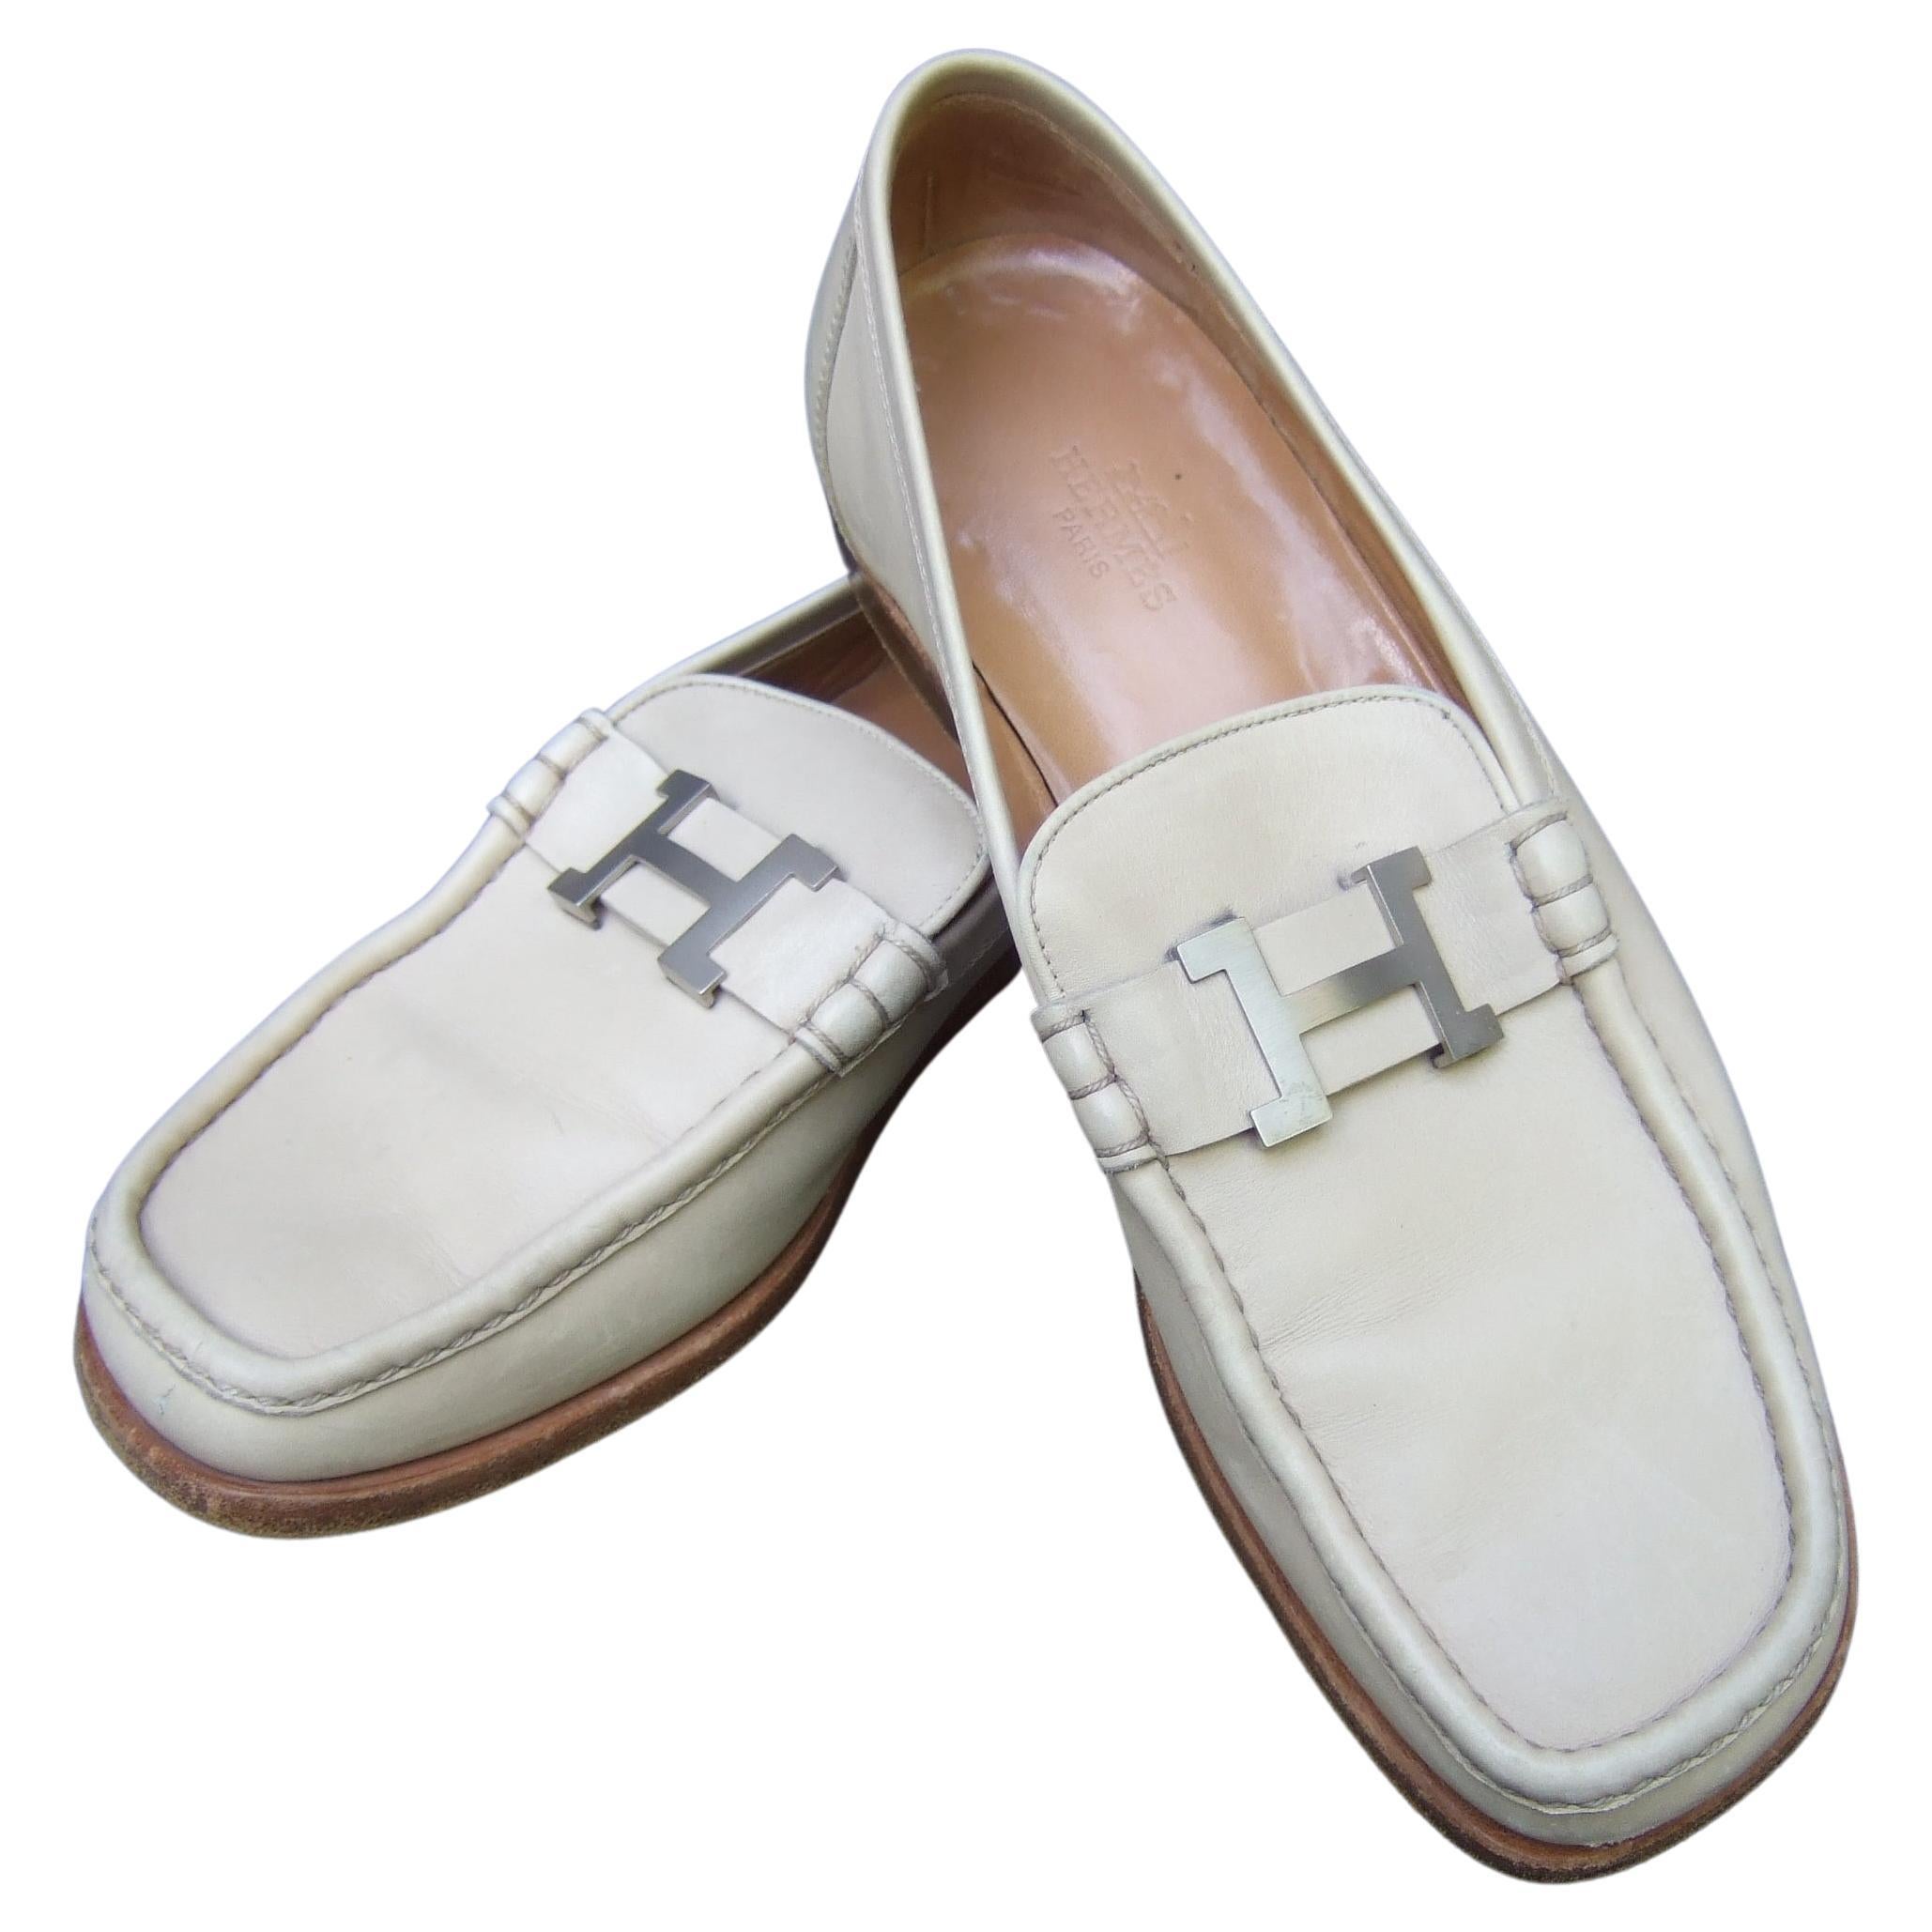 Hermes Paris Women's Constance Silver Buckle Ivory Leather Italian Loafers 1990s